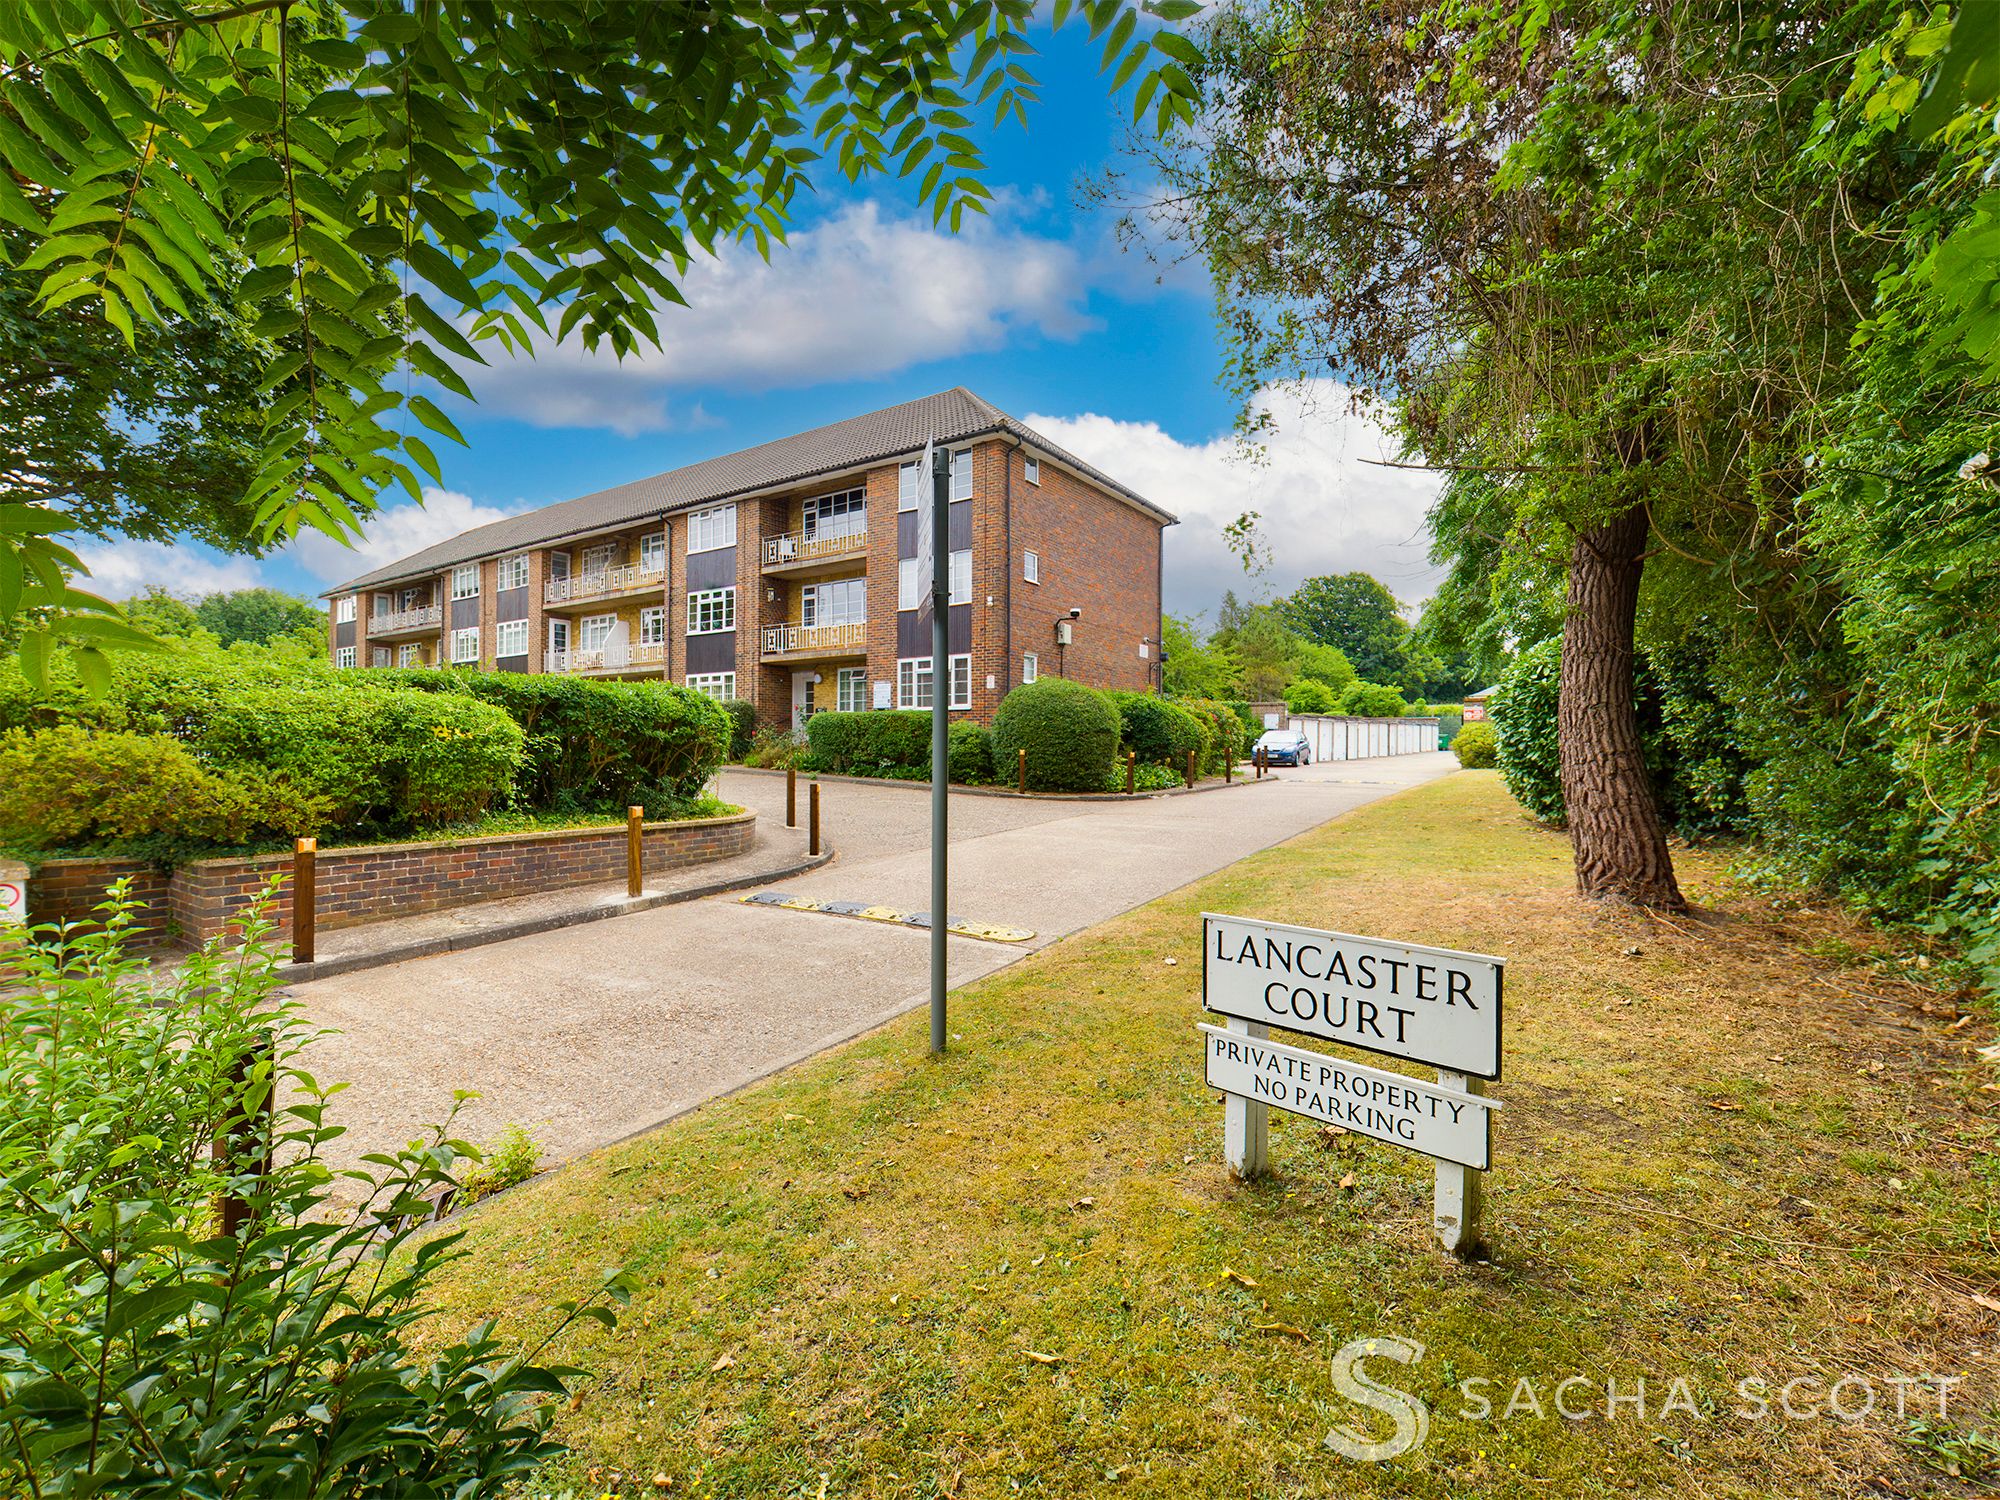 2 bed apartment for sale in Lancaster Court, Banstead - Property Image 1